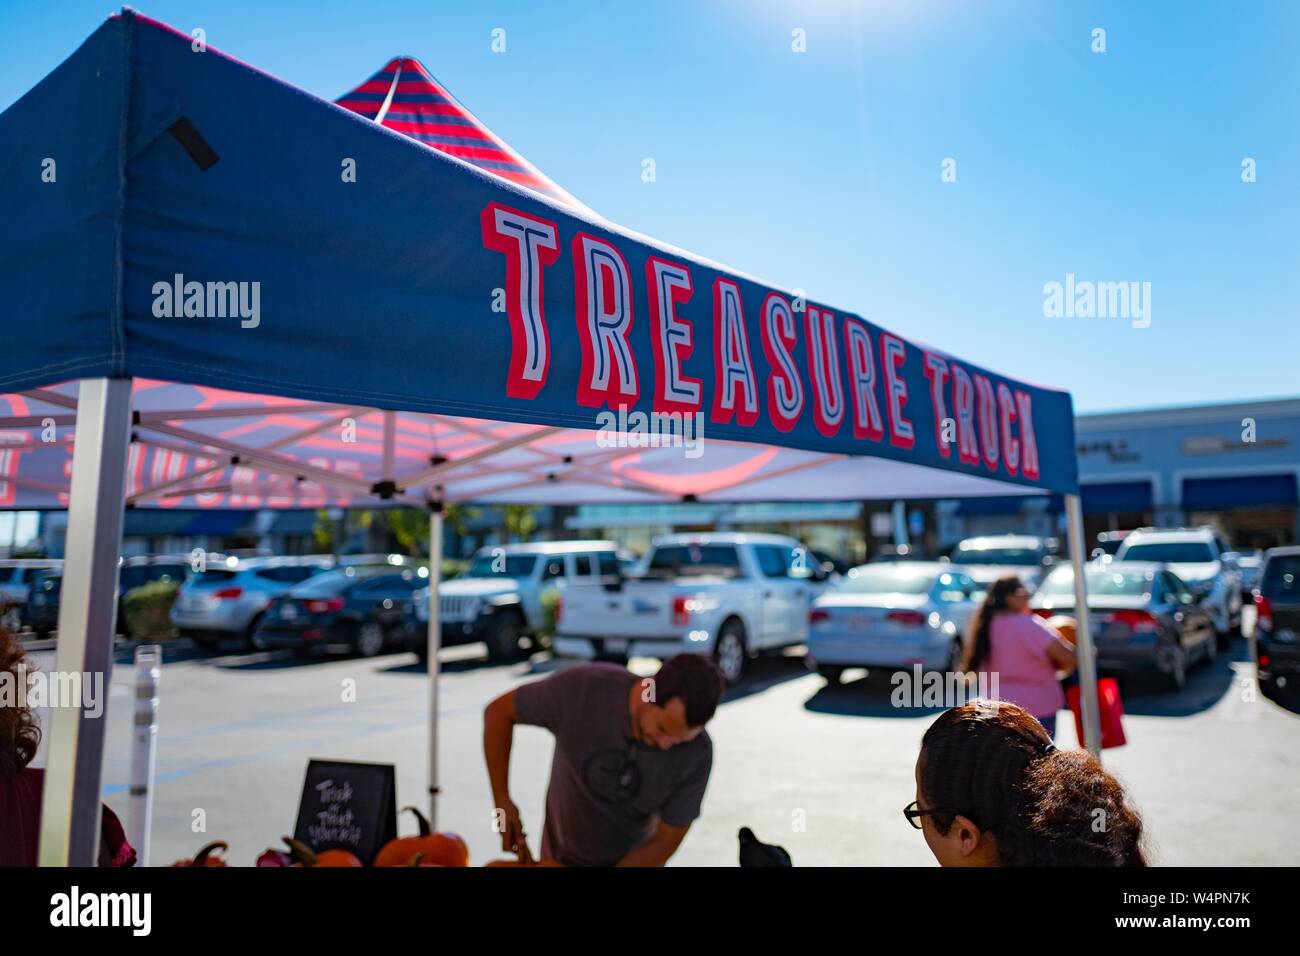 Banner for Amazon Treasure Truck, a mobile pop-up store operated by Amazon as part of the Amazon Prime program, parked in a shopping development in the Marina del Rey neighborhood of Los Angeles, California, October 20, 2018. () Stock Photo